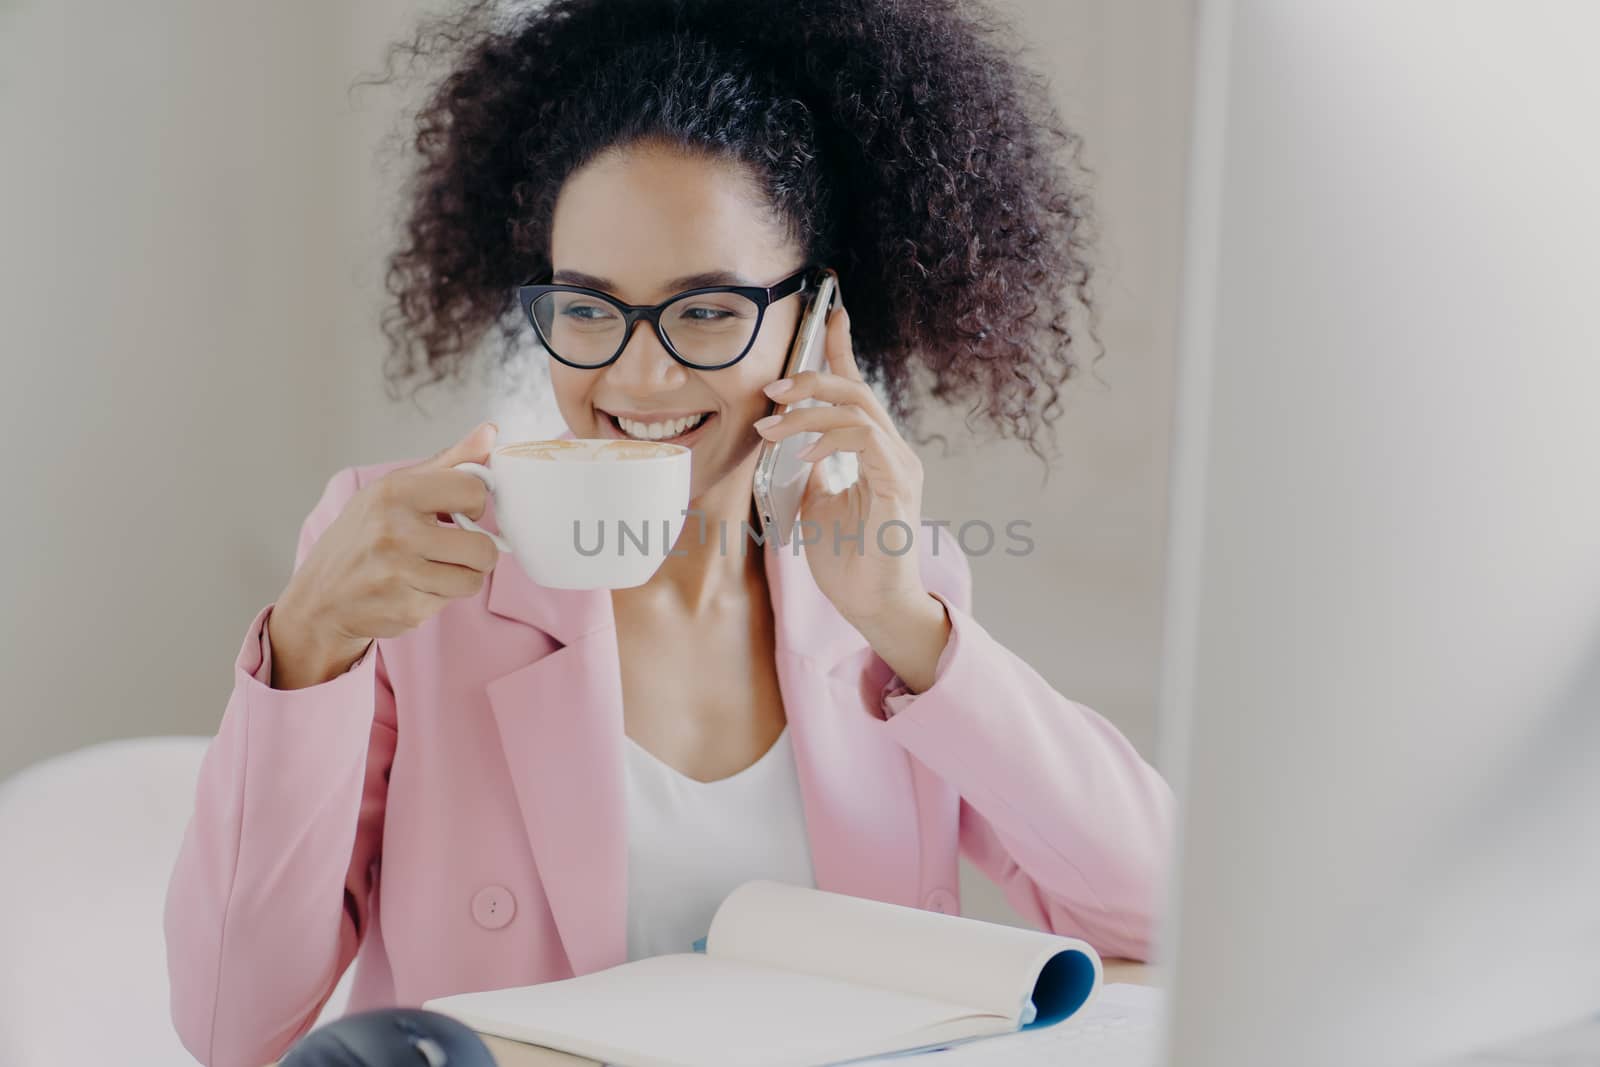 Cropped image of happy young African American woman makes phone call, drinks aromatic latte or espresso, poses in office interior, has pleasant smile wears optical glasses and rosy formal jacket by vkstock